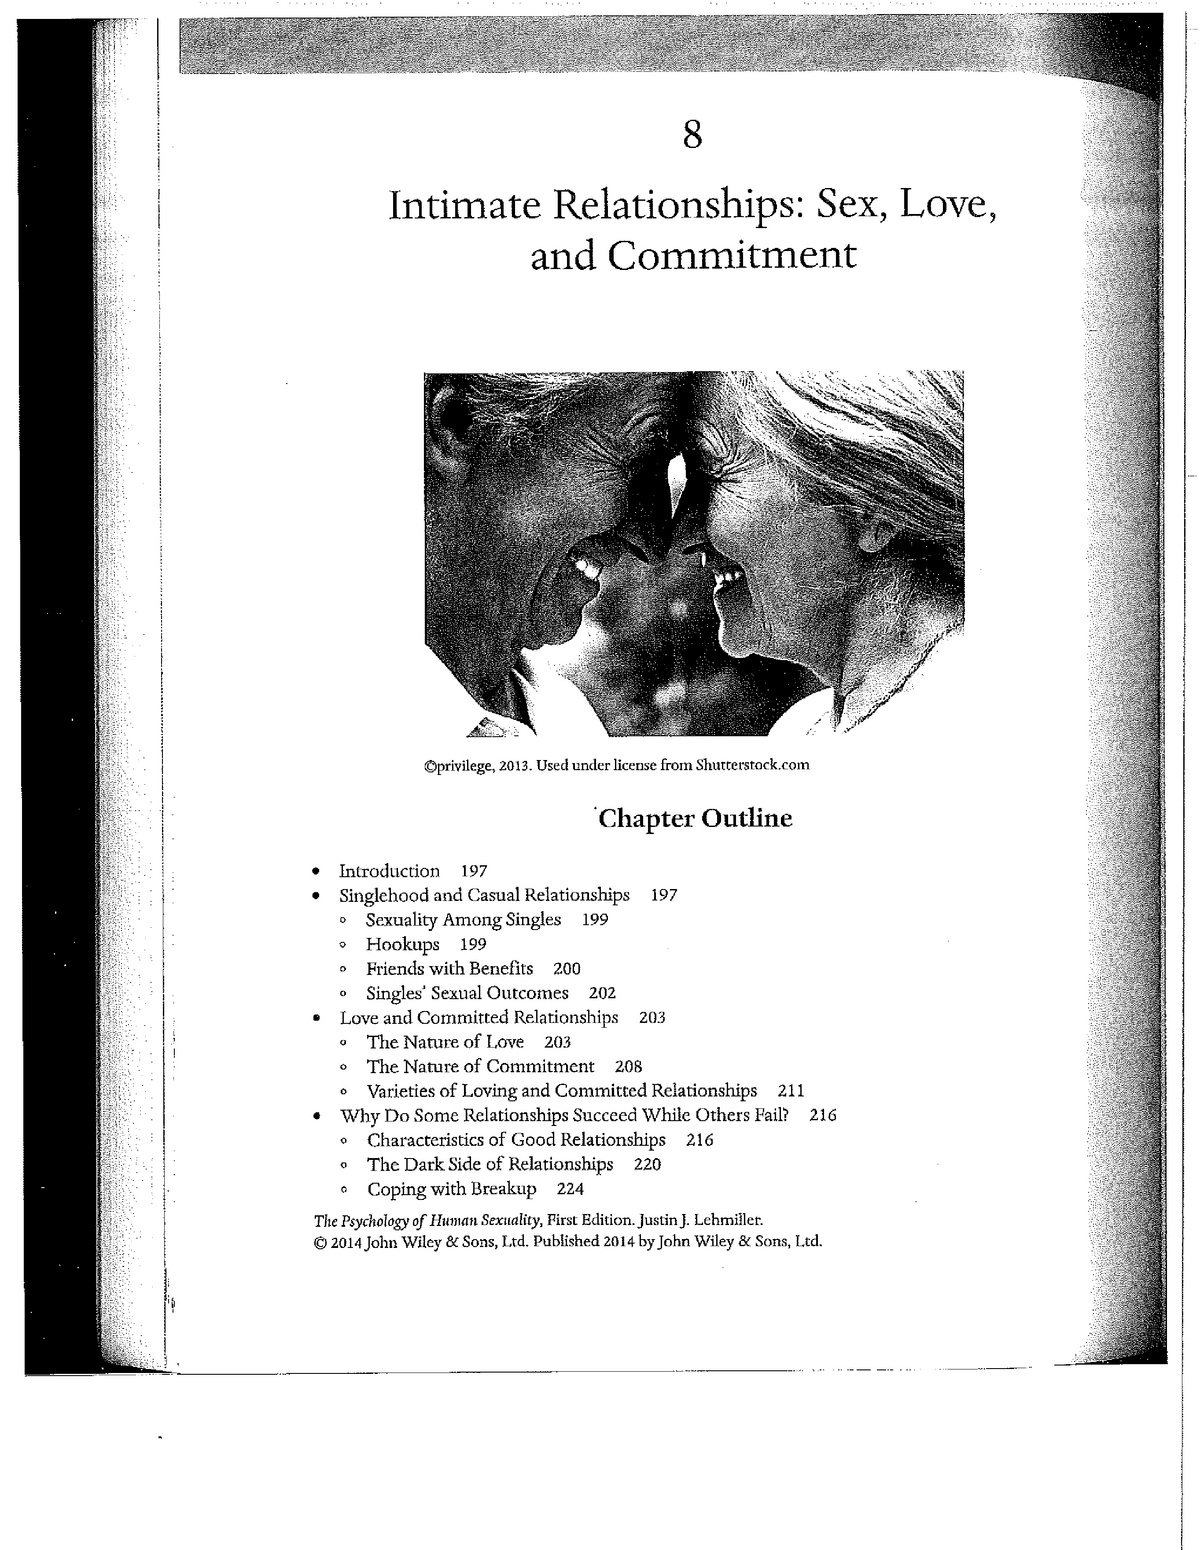 Psychology of Human Sexuality by Lehmiller - Intimate Relationships Sex Love and Commitment